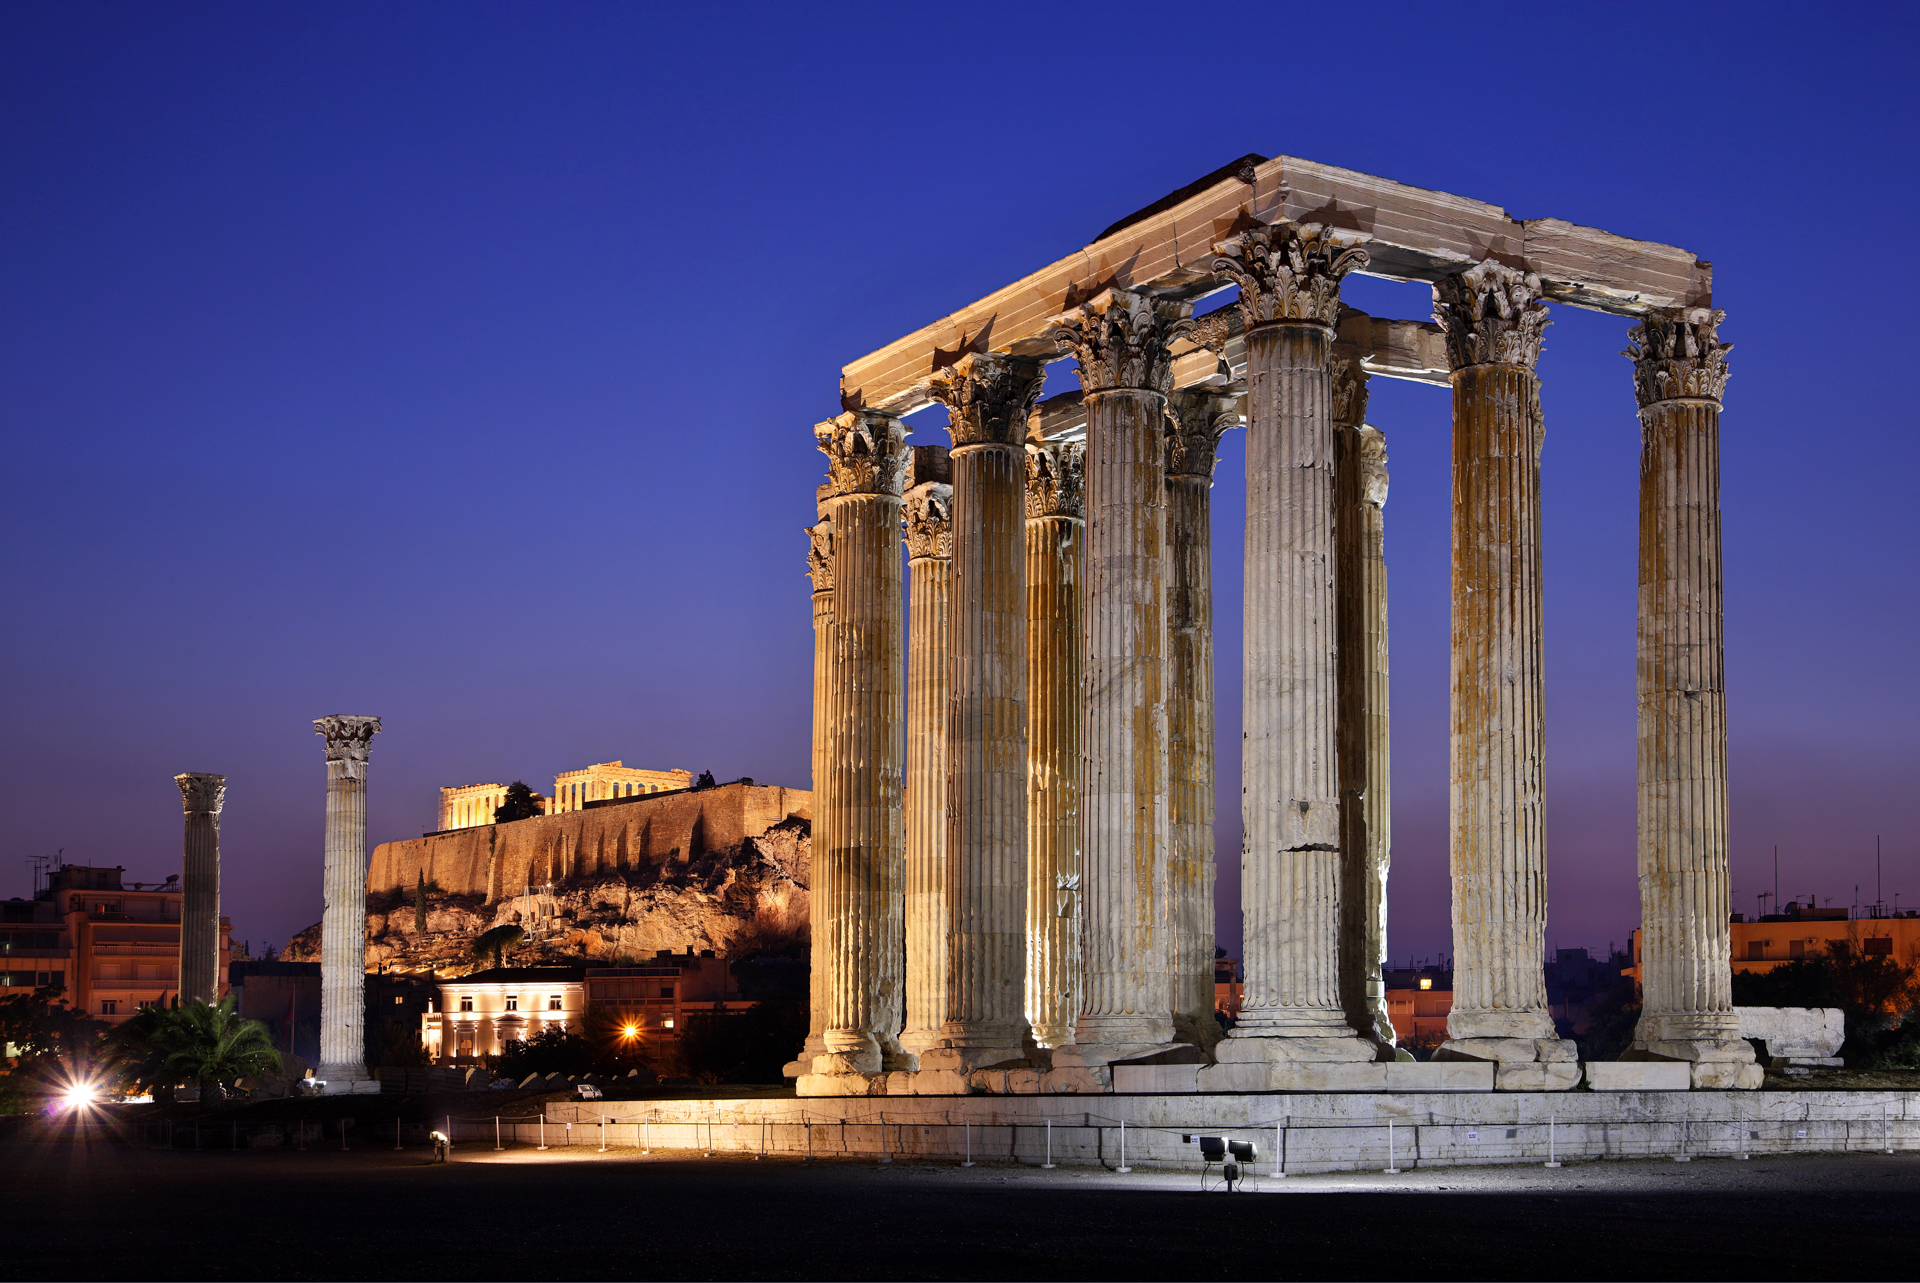 Greek Architecture: In-depth Overview of Ancient Marvels.